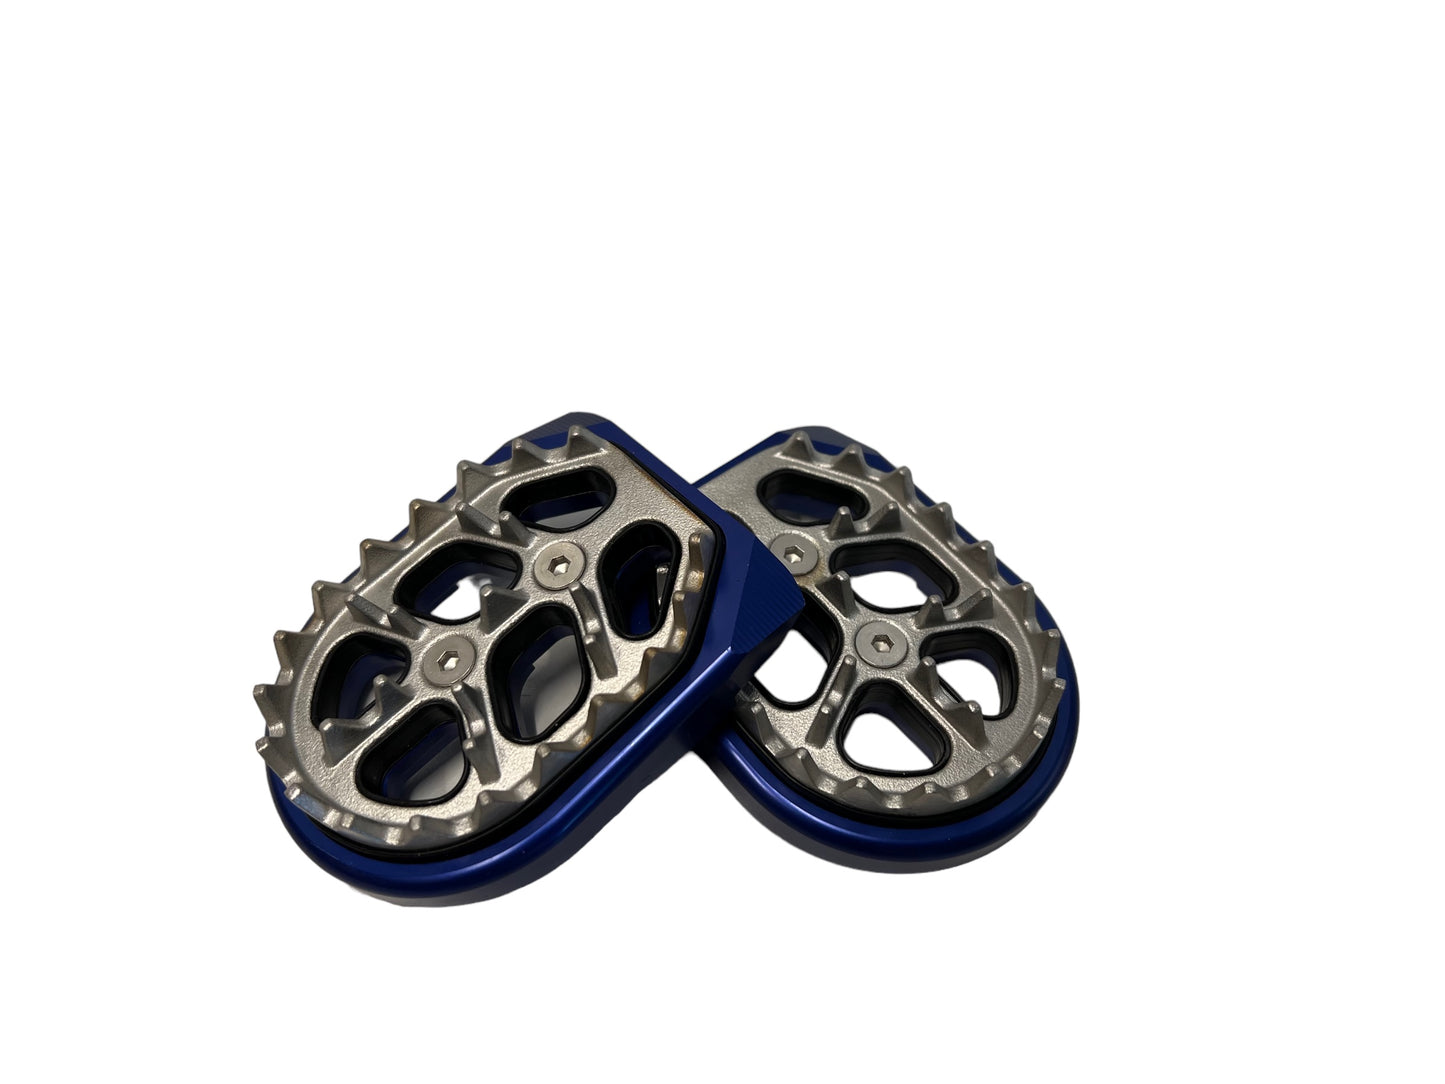 Stacyc CNC Anodized Foot Pegs - Blue